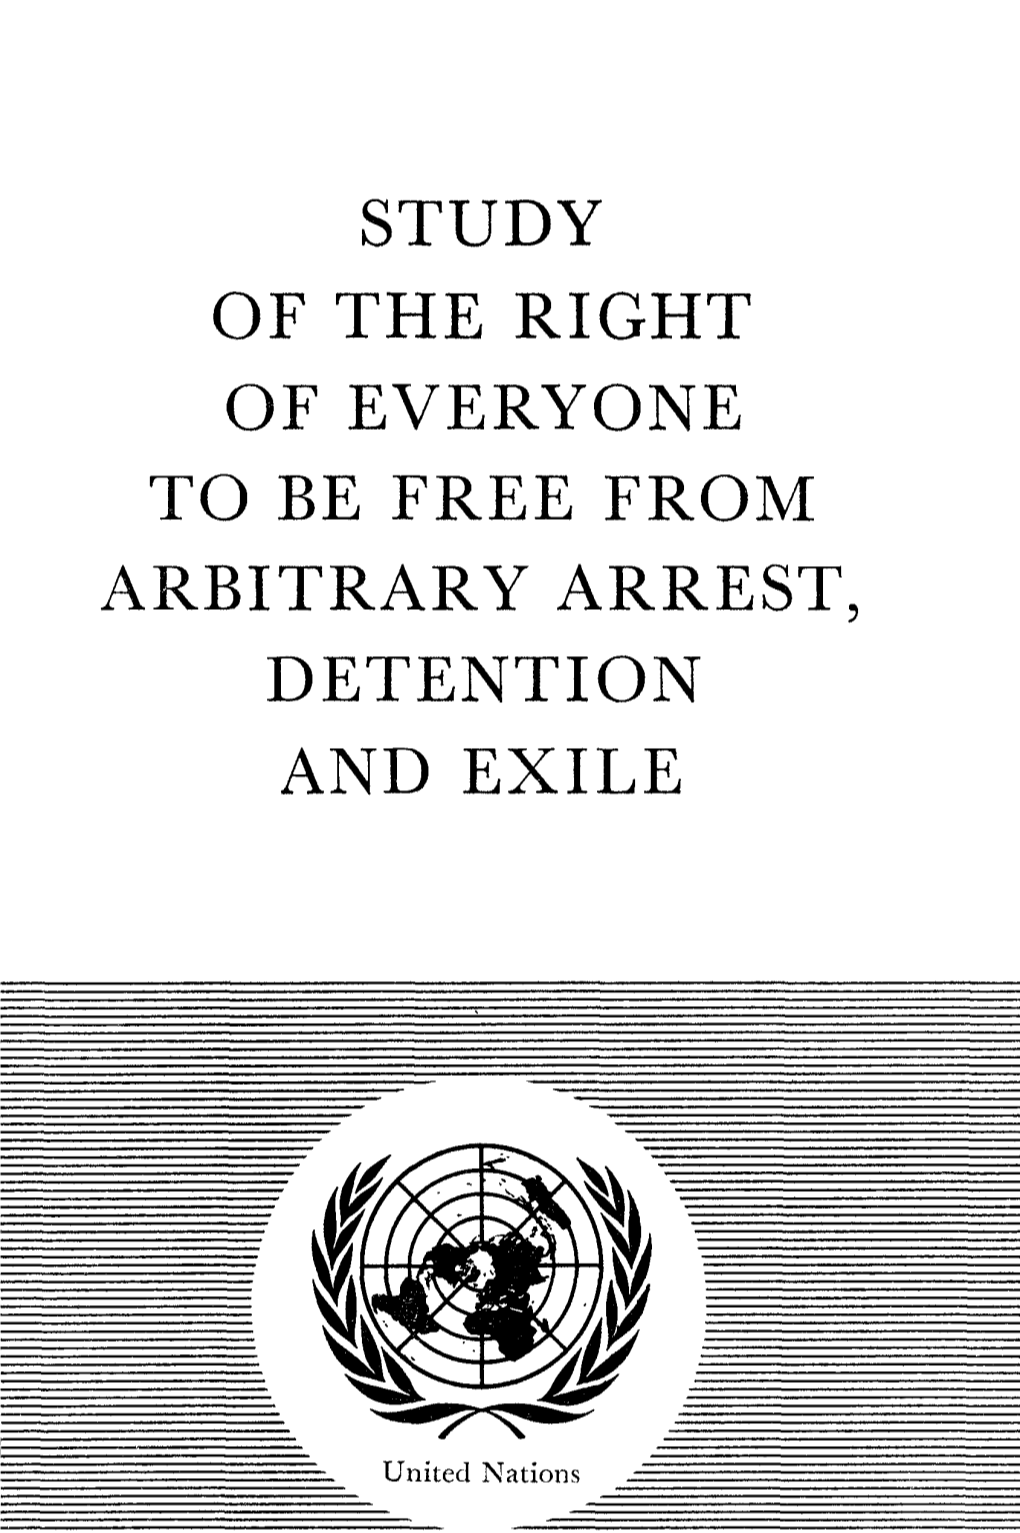 Study of the Right of Everyone to Be Free from Arbitrary Arrest, Detention and Exile